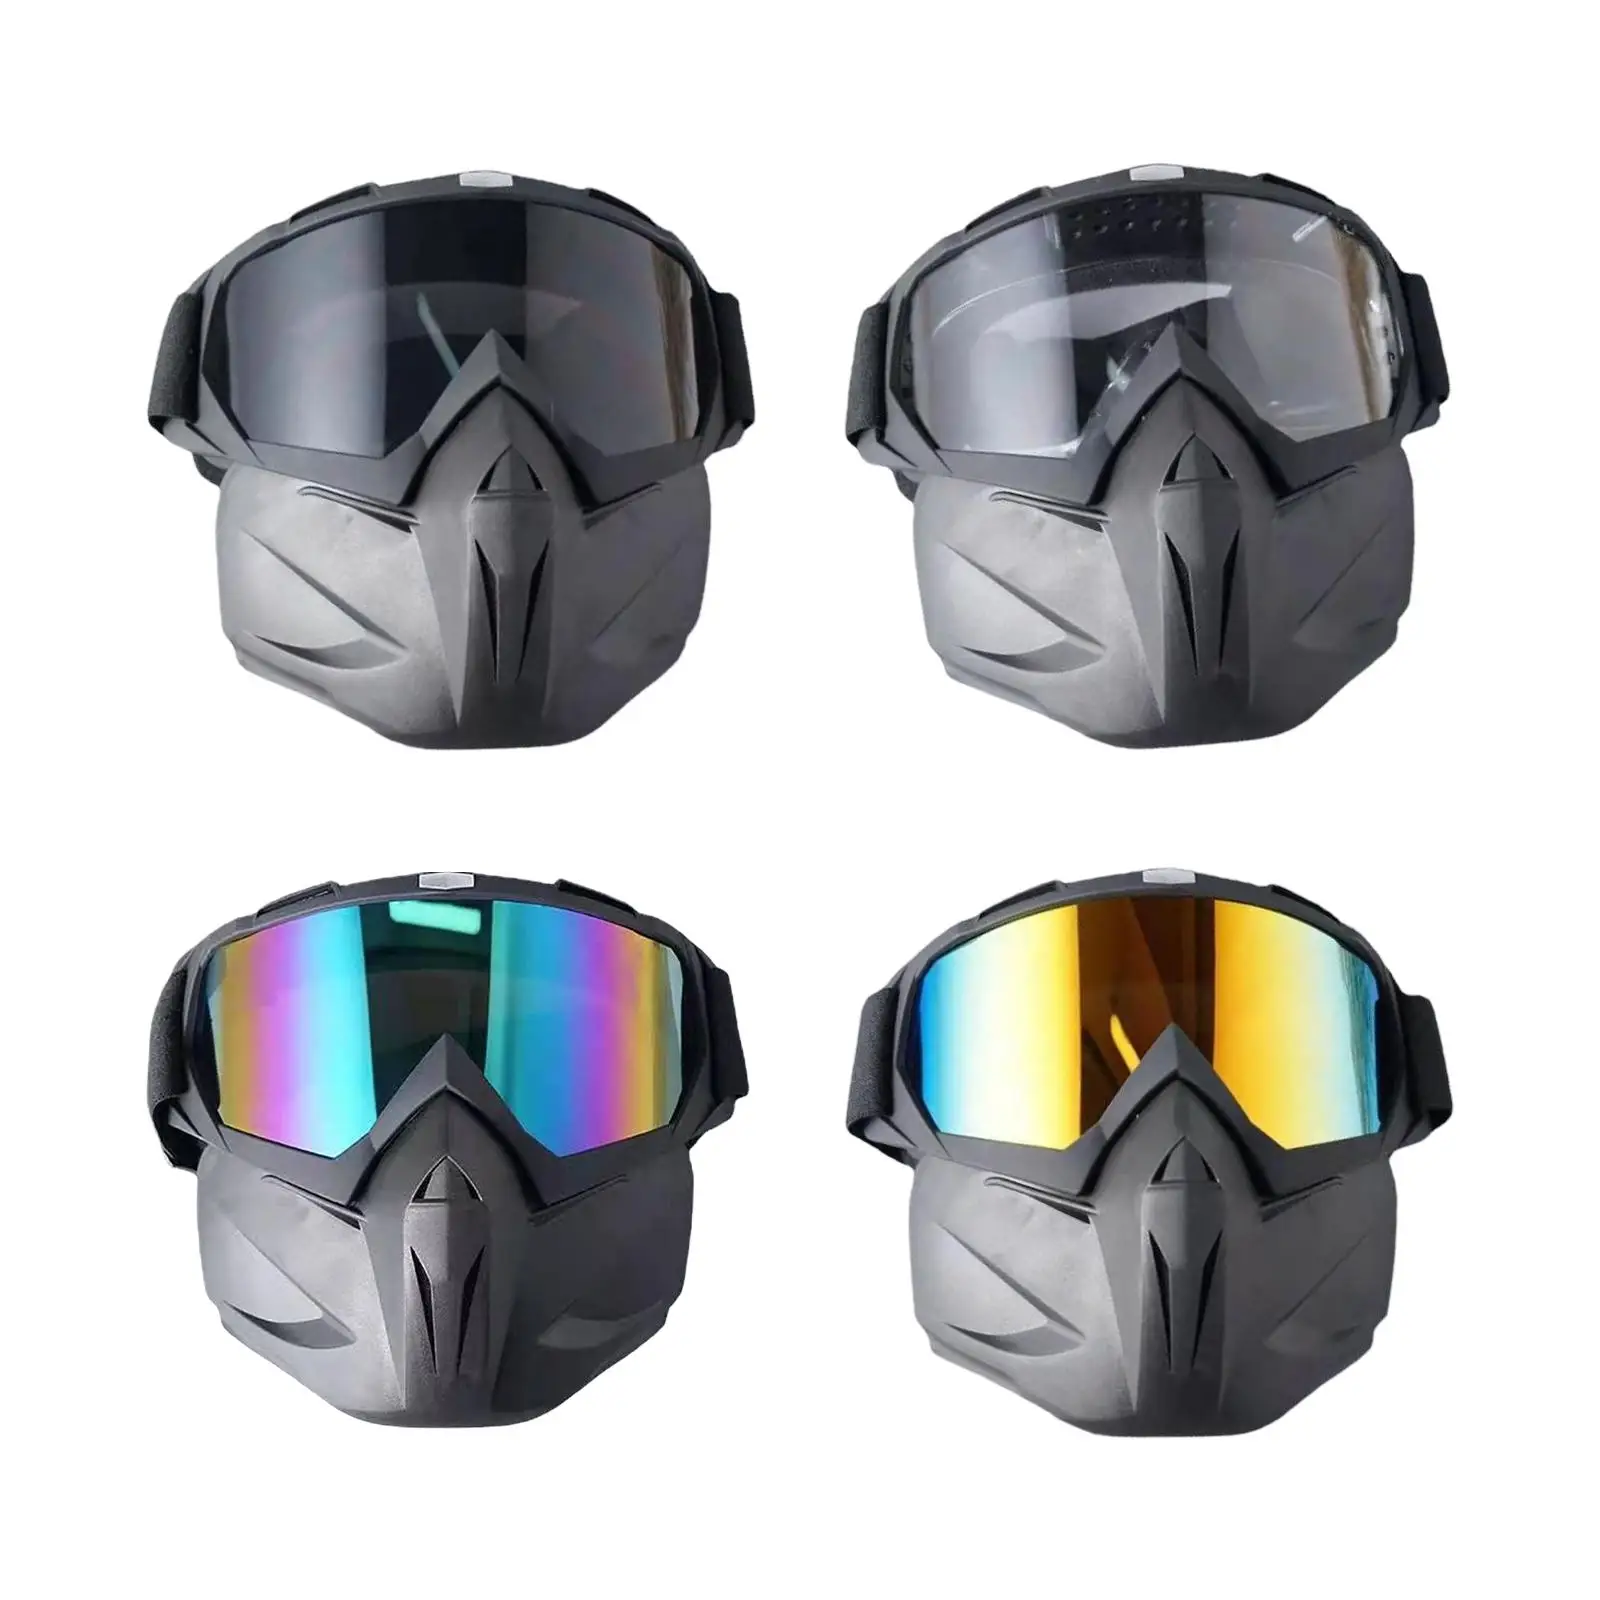 Motorcycle Goggles Mask Helmet Riding Goggles Windproof Fit for Riding Ski